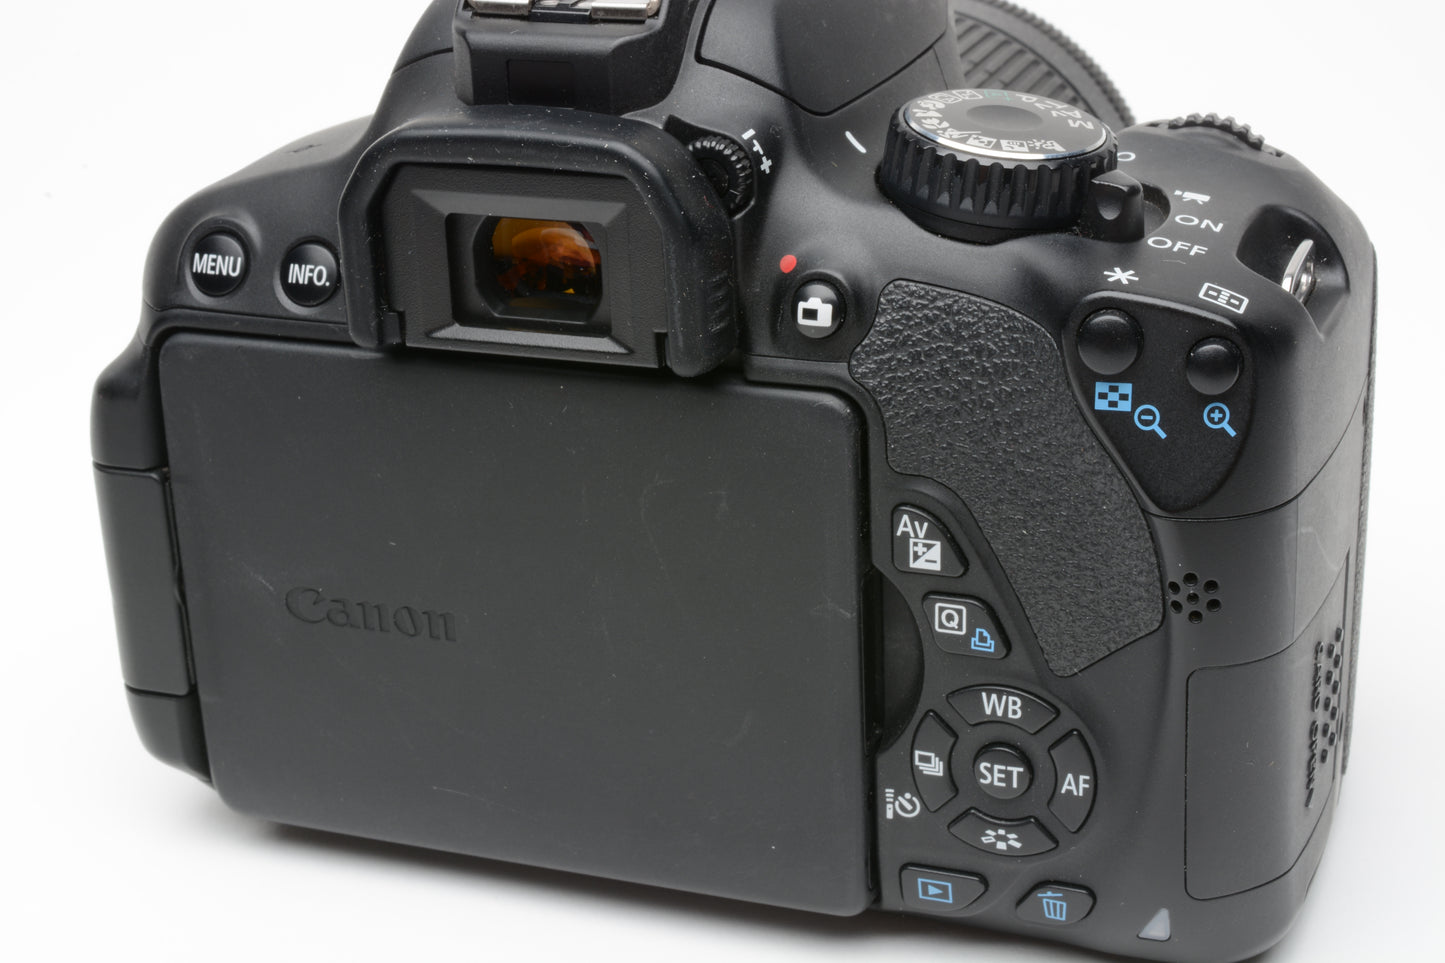 Canon T4i DSLR w/18-55mm f3.5-5.6 IS, batt+charger+strap, tested, clean, 12,784 Acts!